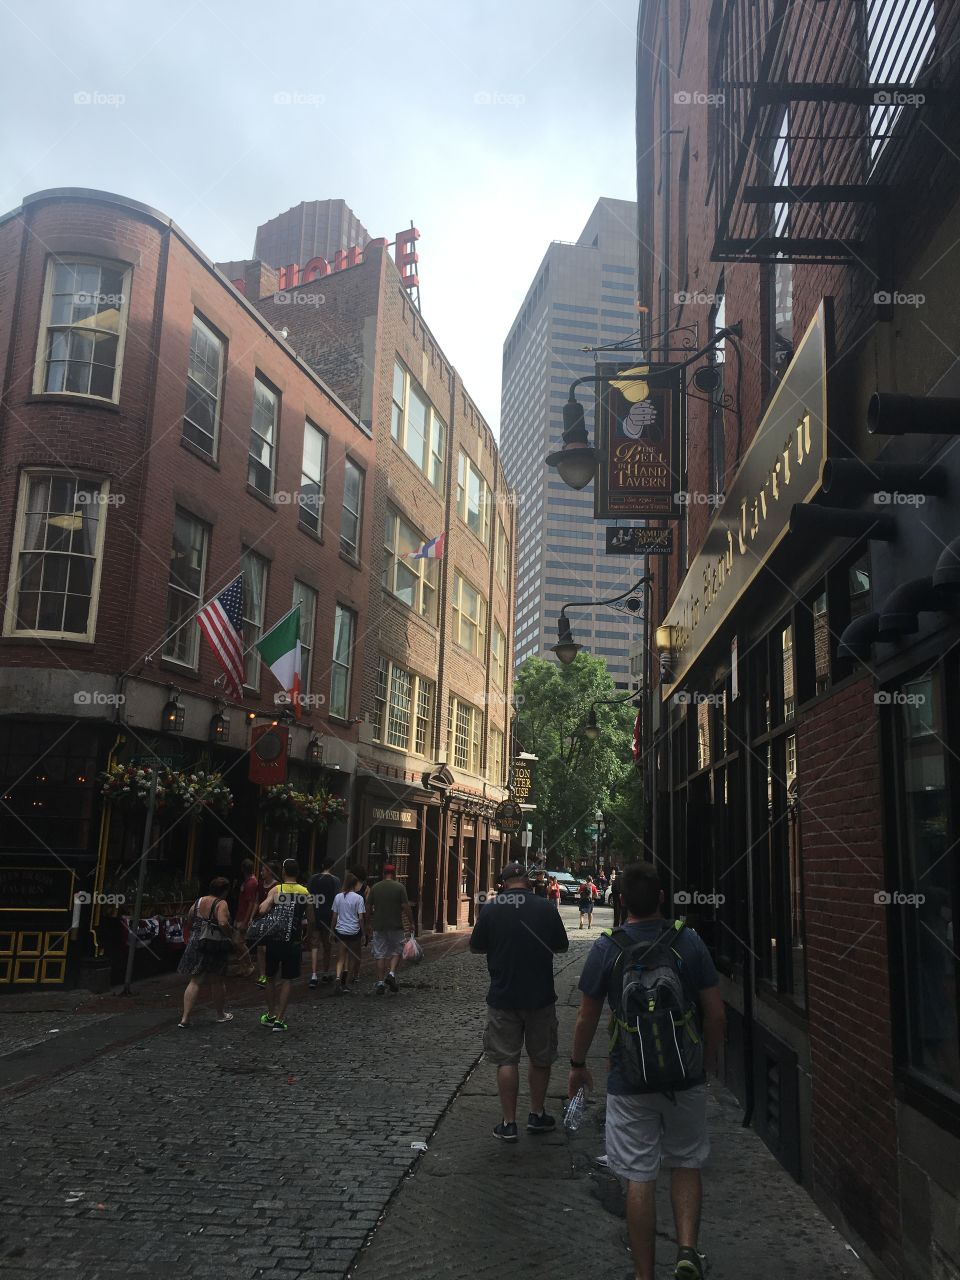 The old streets of Boston 